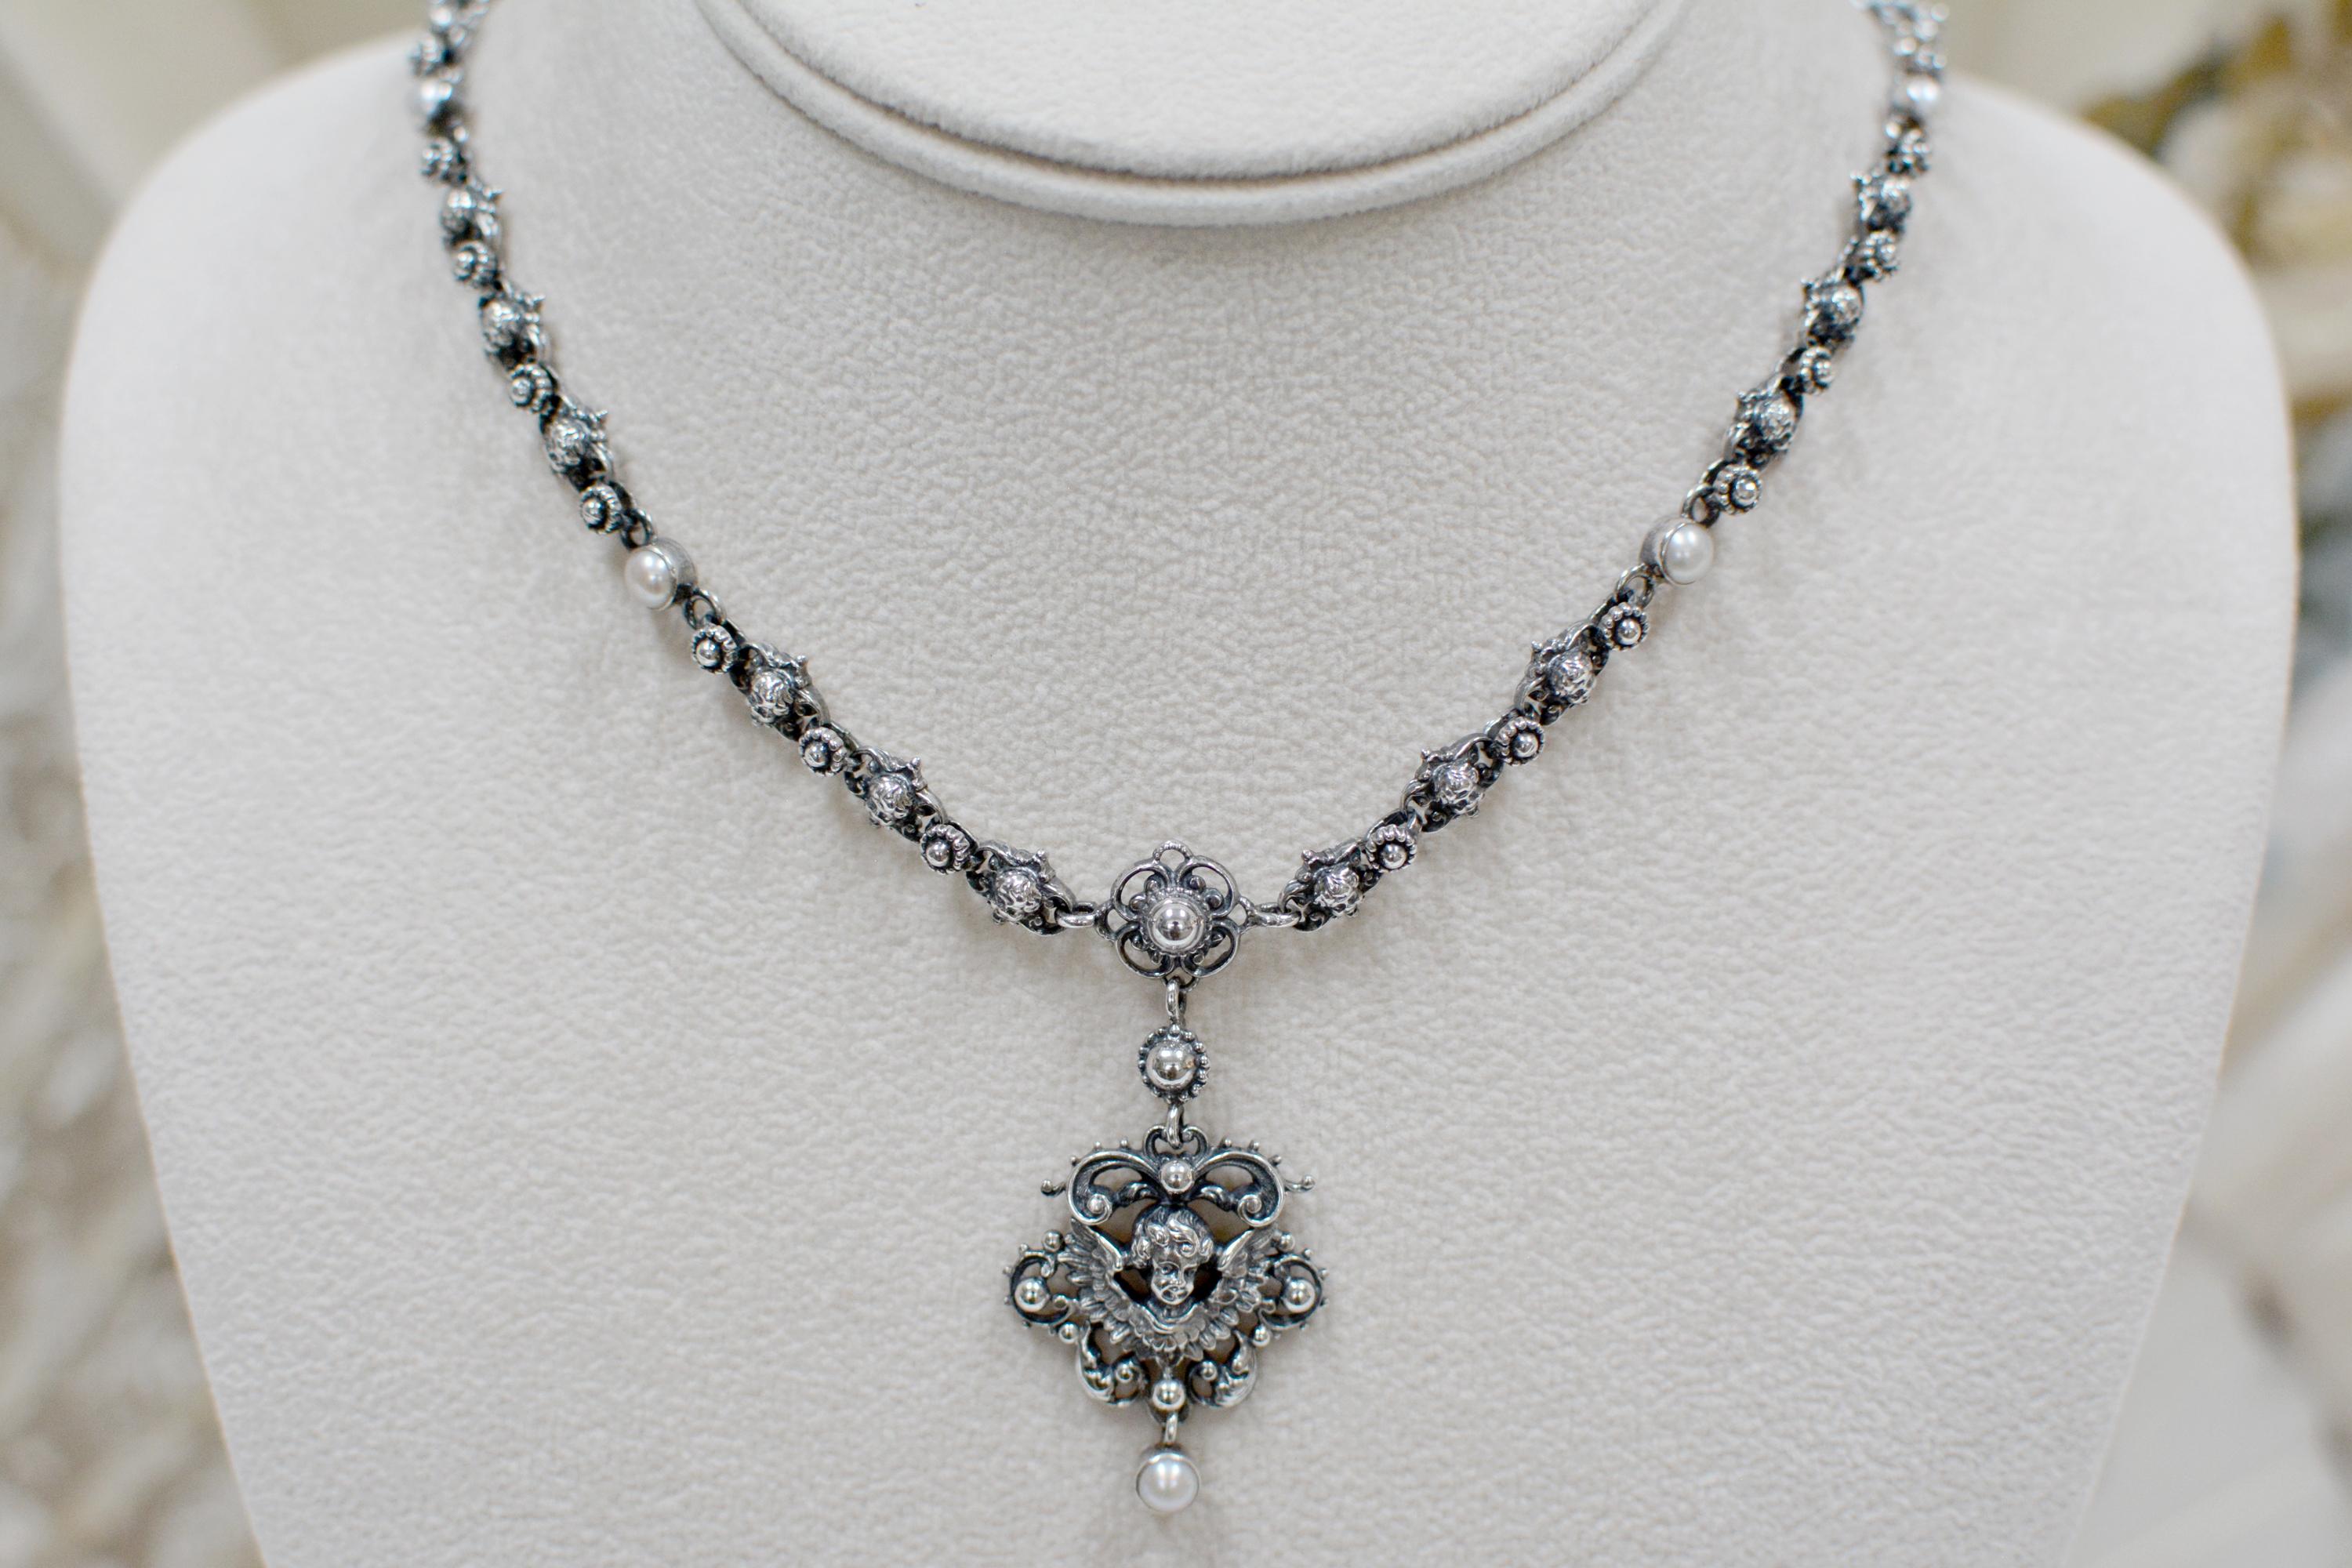 This exquisite original Jill Garber drop necklace is comprised of twenty-eight, very fine figural cherub angel links joined together by delicate sterling silver flower links. This lovely necklace requires extensive hours of hand work to assemble.